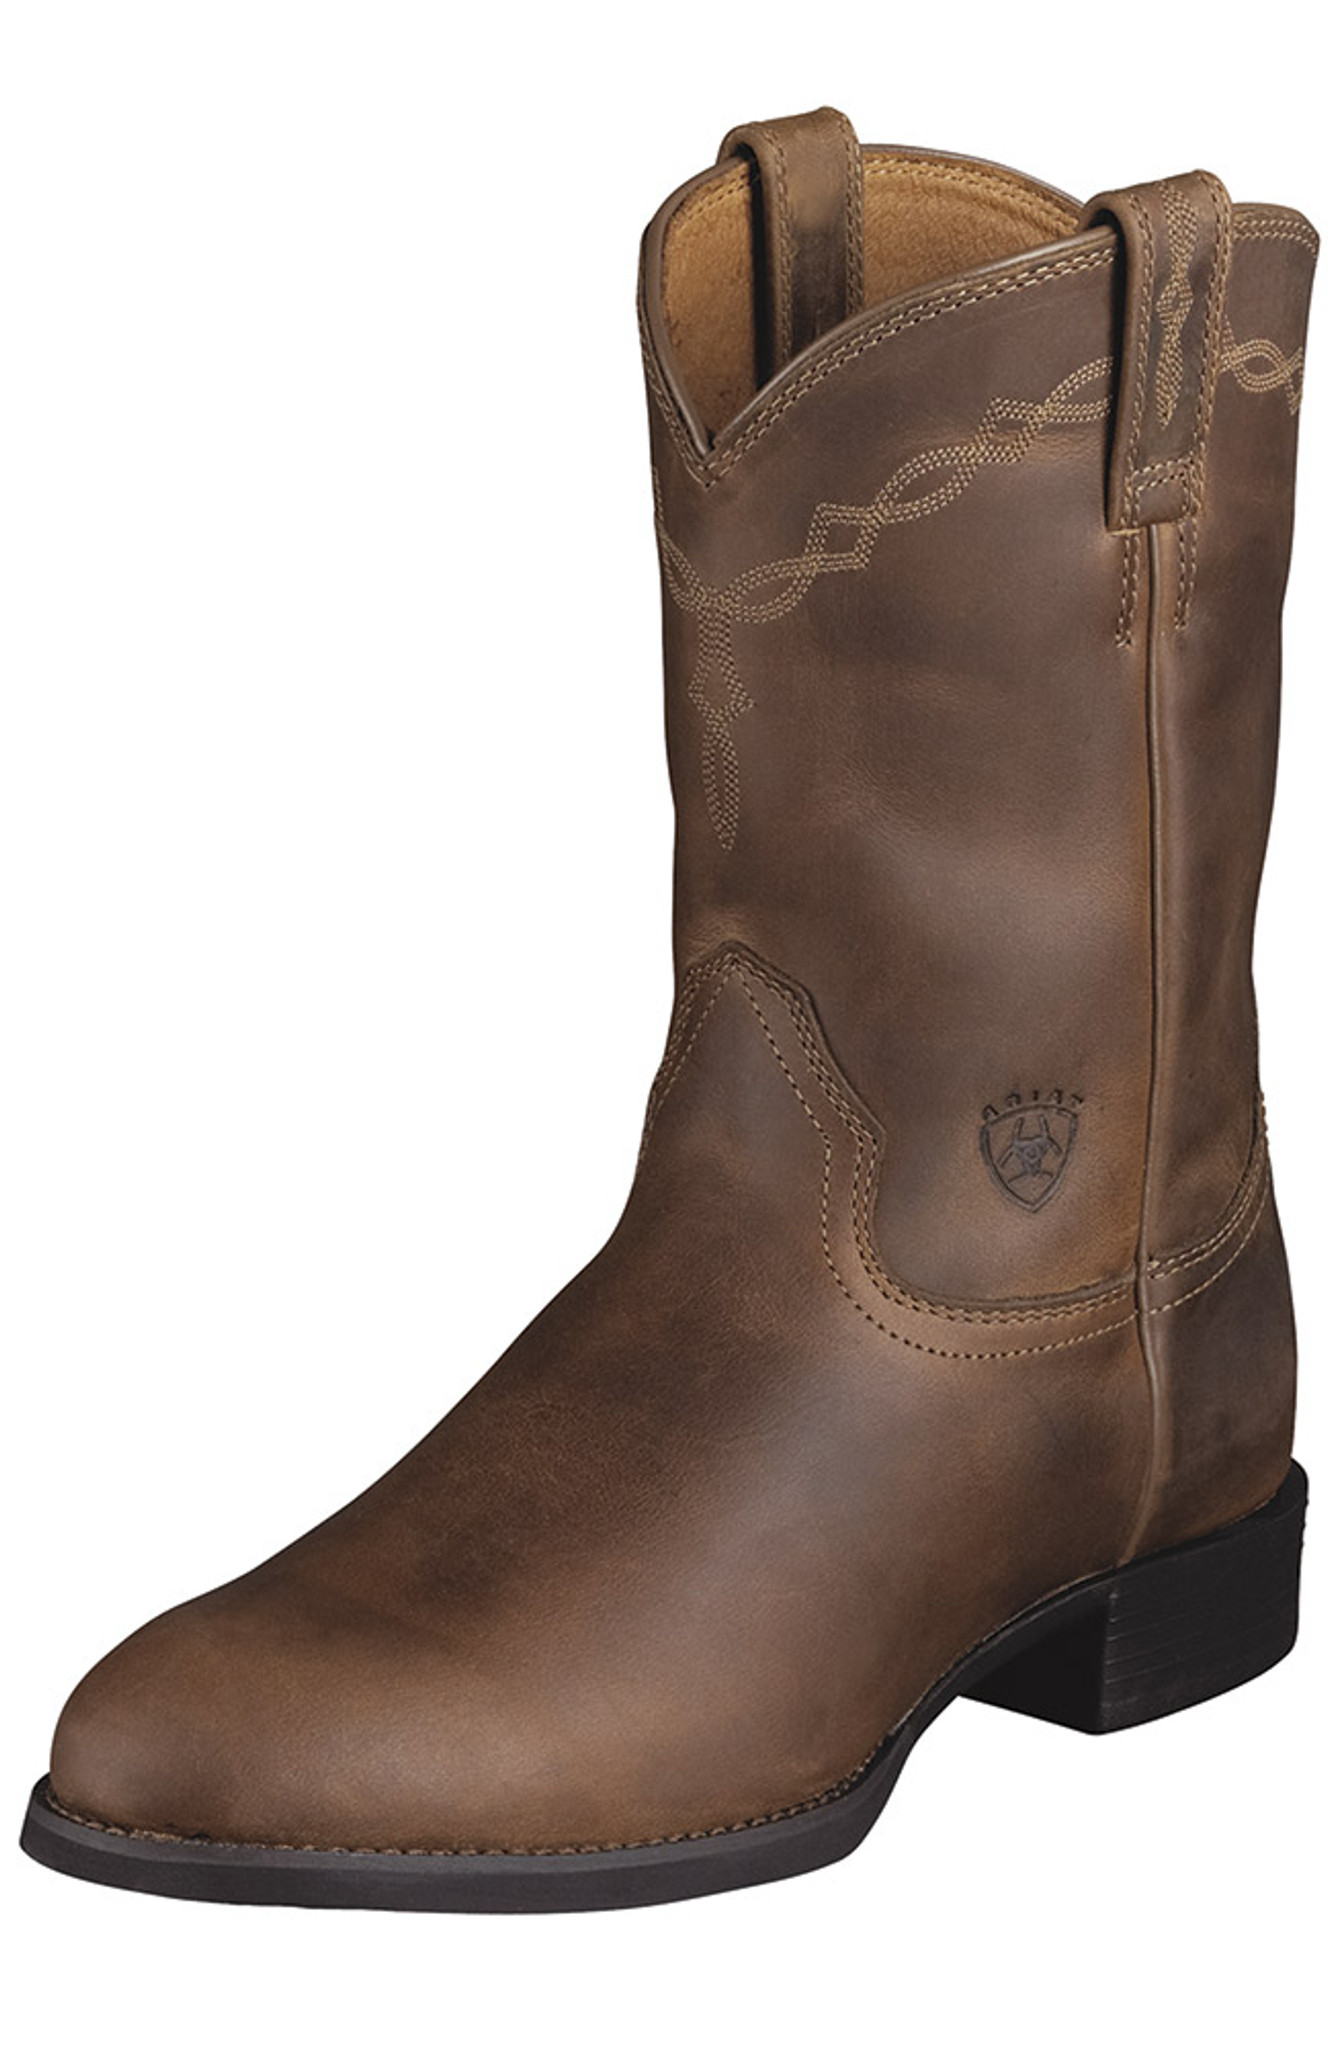 Ariat Men's Heritage Roper 10" Round Toe Boots - Distressed Brown